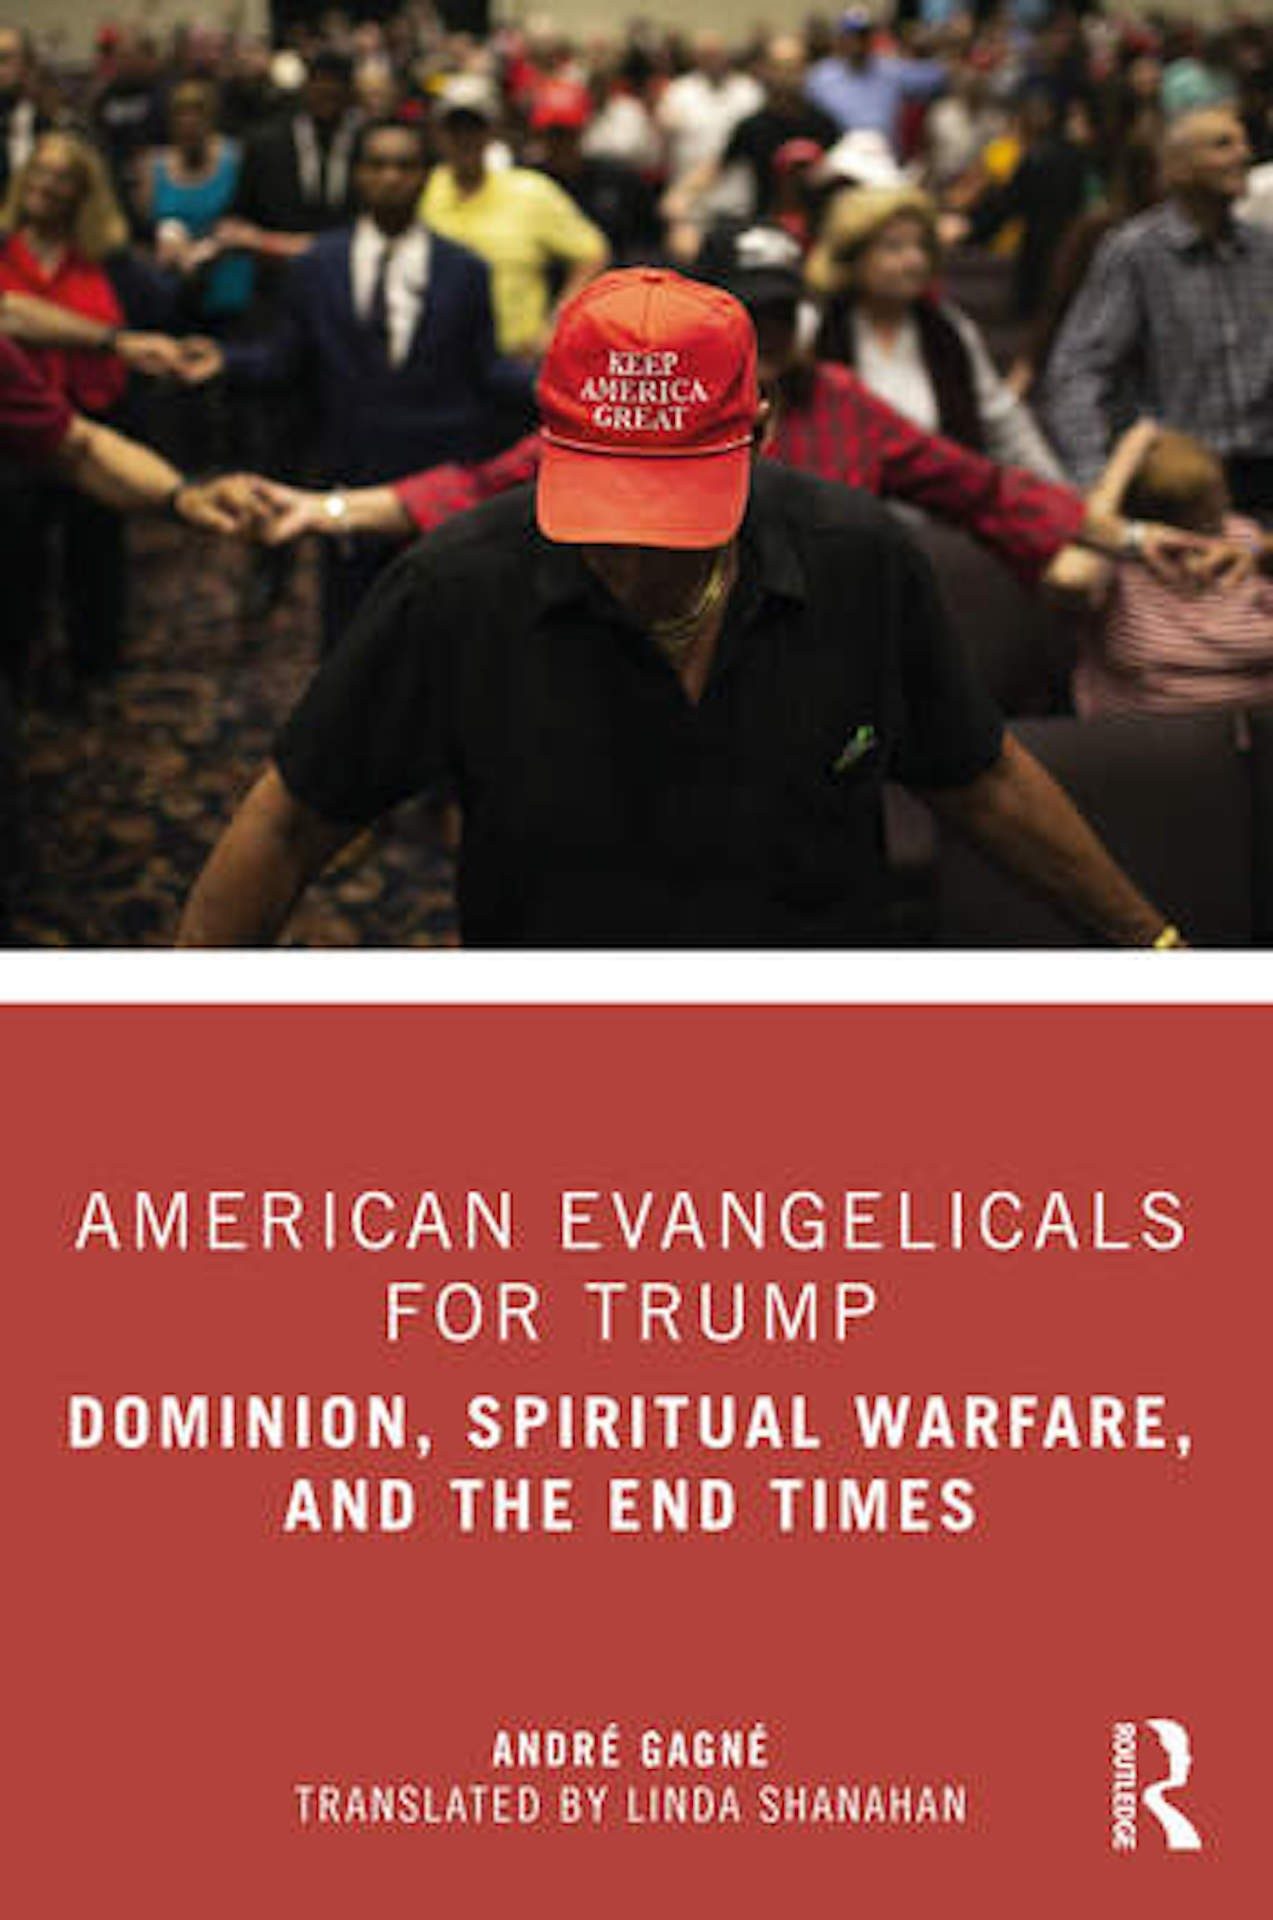 Book cover of American Evangelicals for Trump: Dominion, Spiritual Warfare, and the End Times by André Gagné